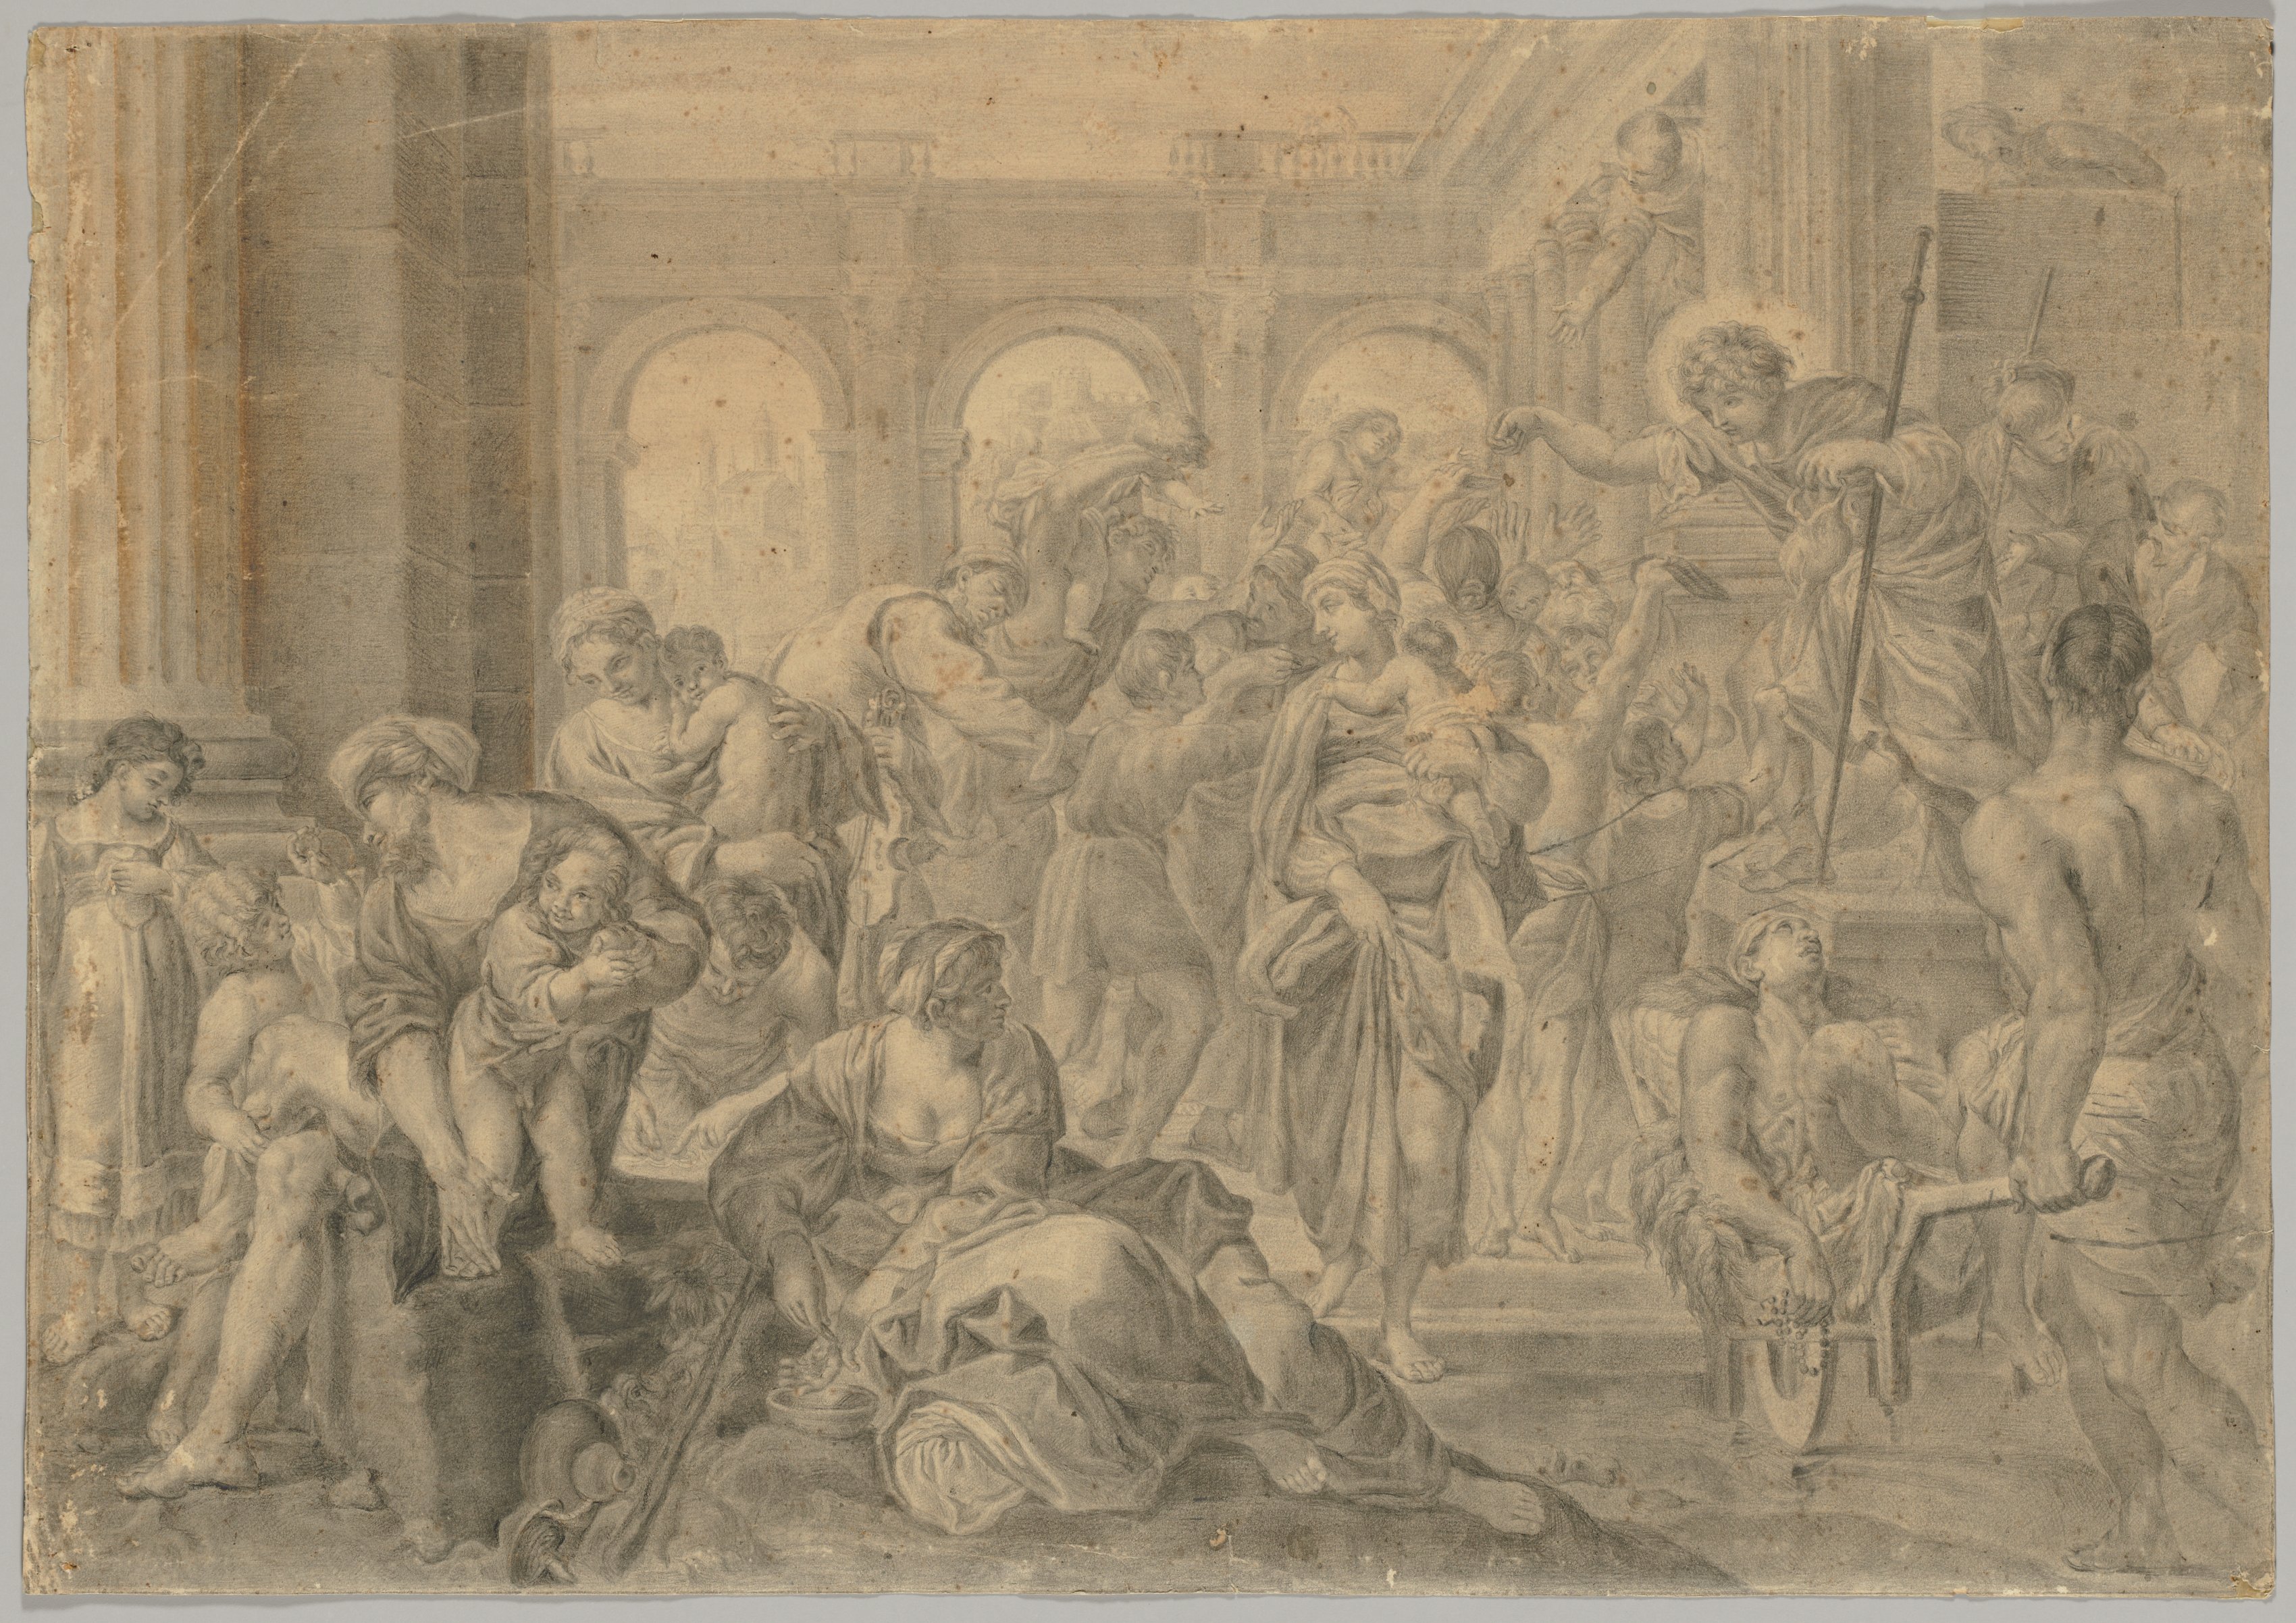 Copy of Annibale Carracci's St. Roch Giving Alms